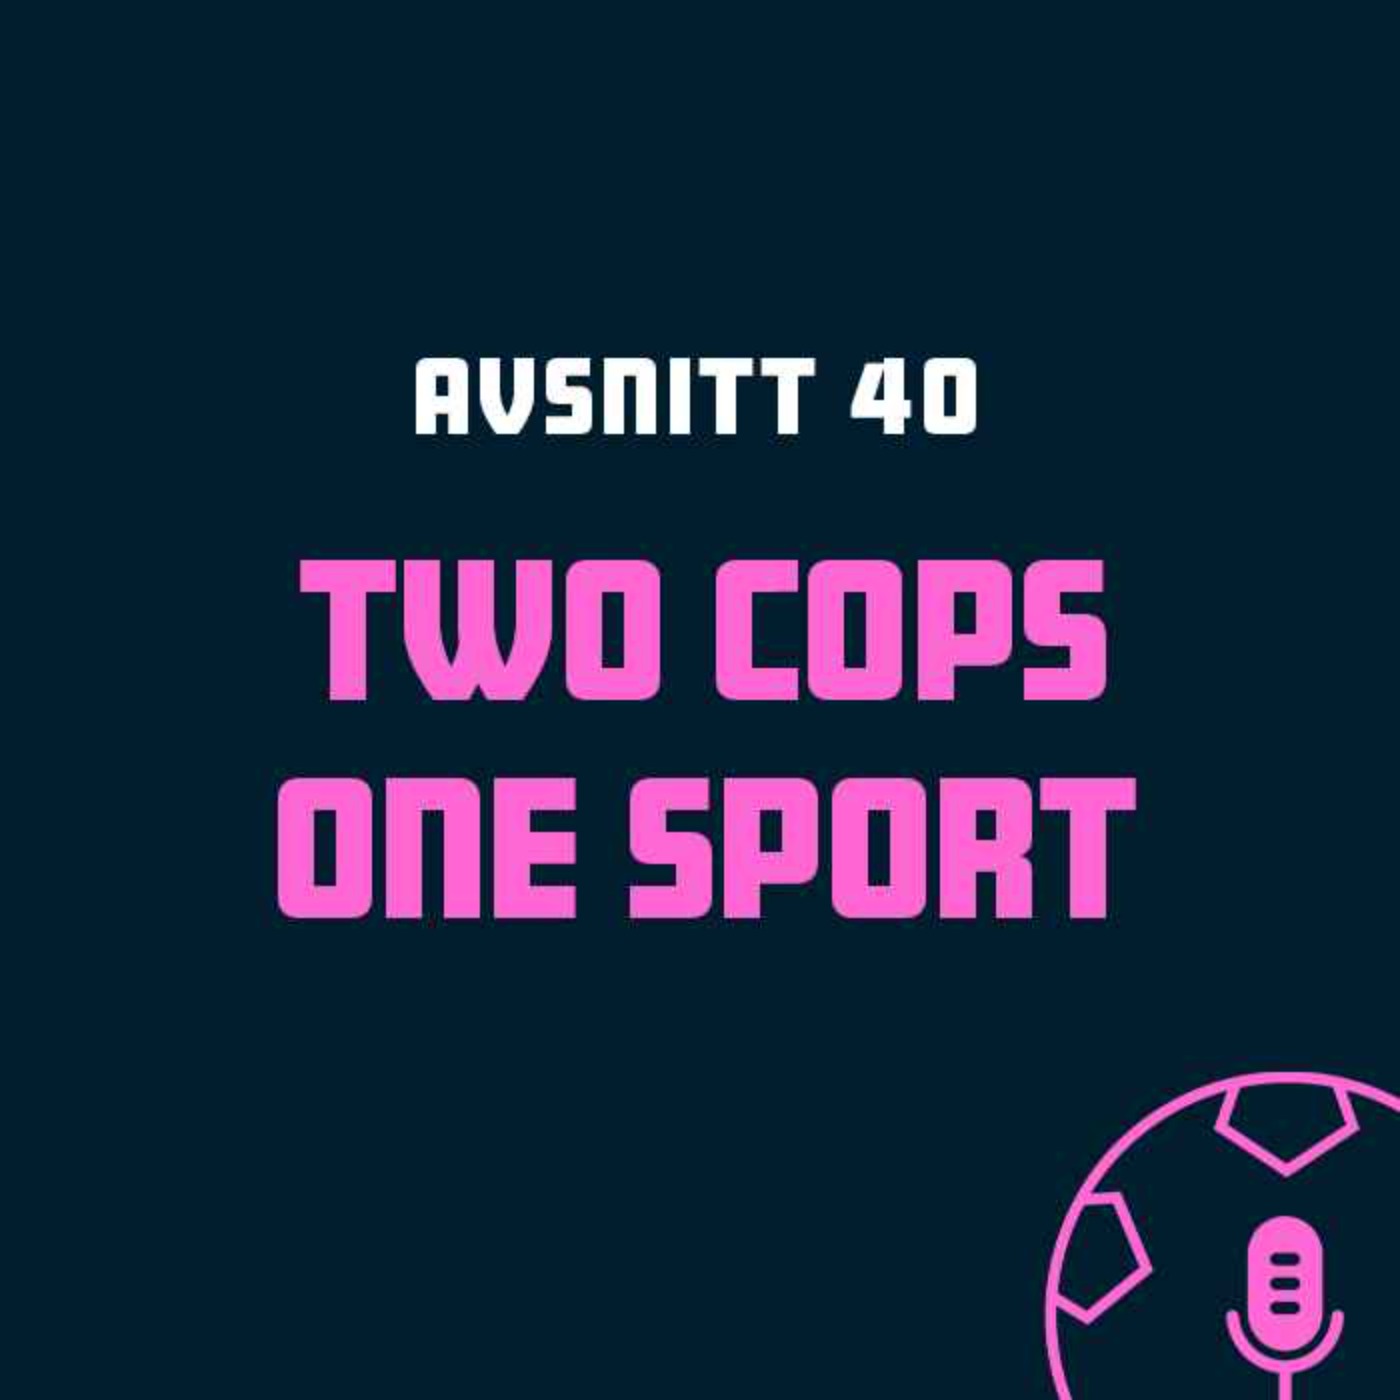 Two cops one sport